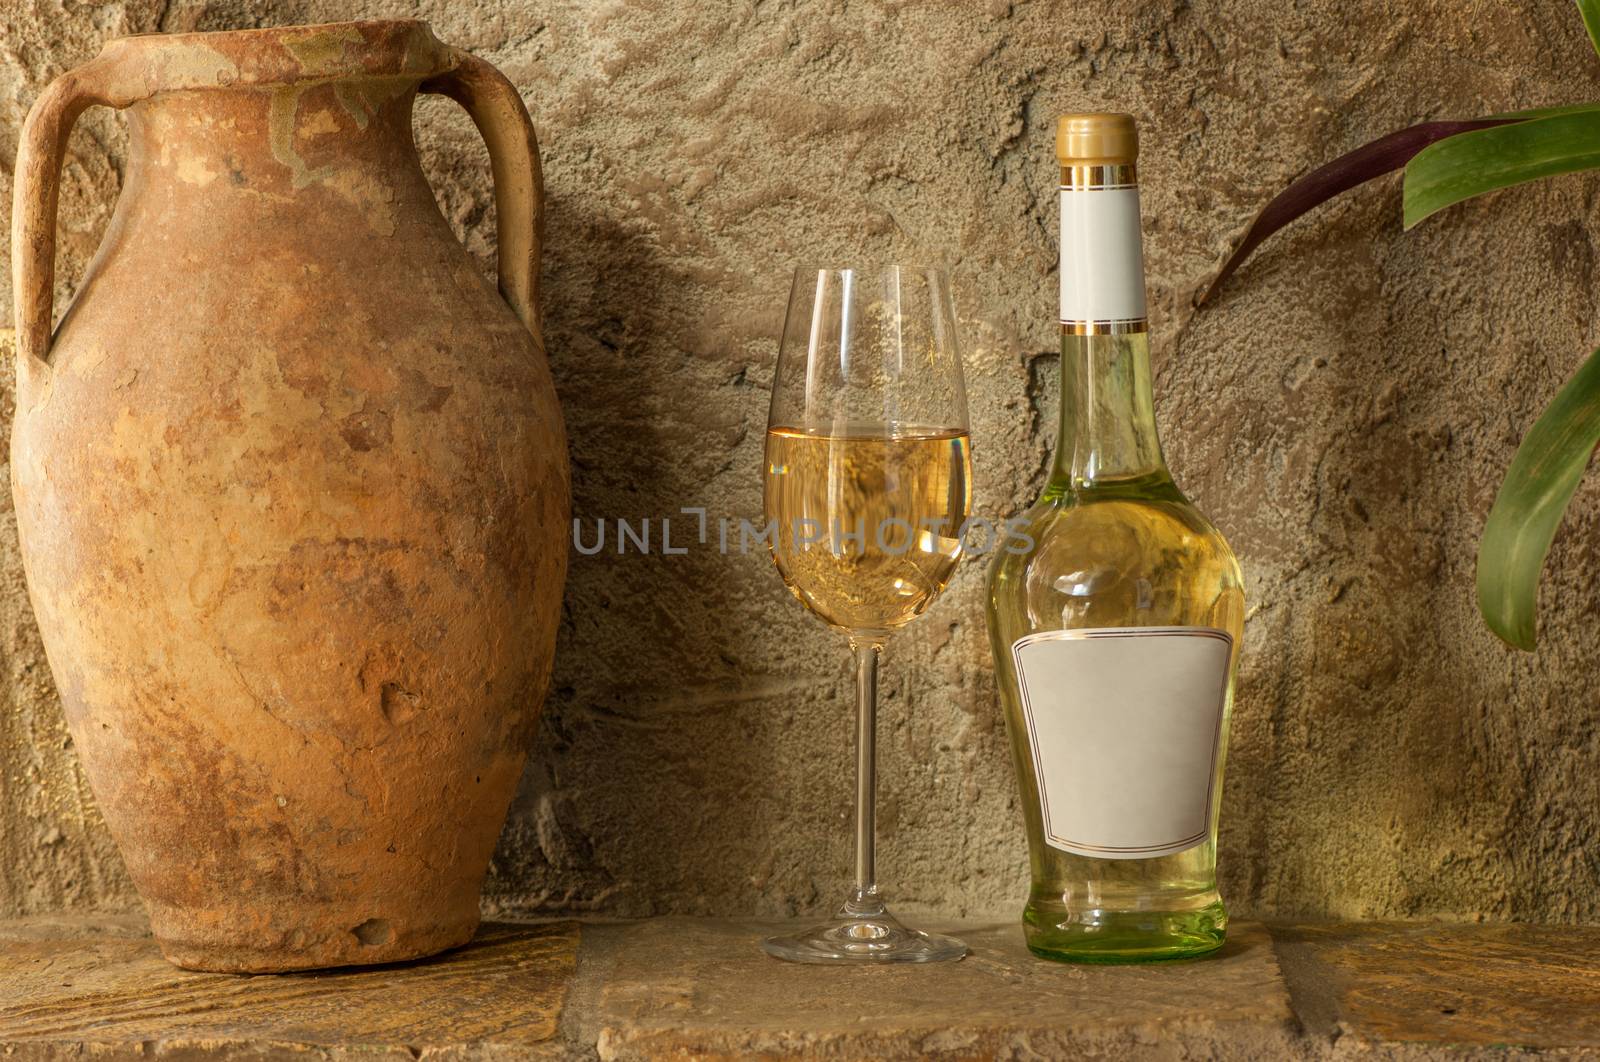 white wine and old jug by A_Karim